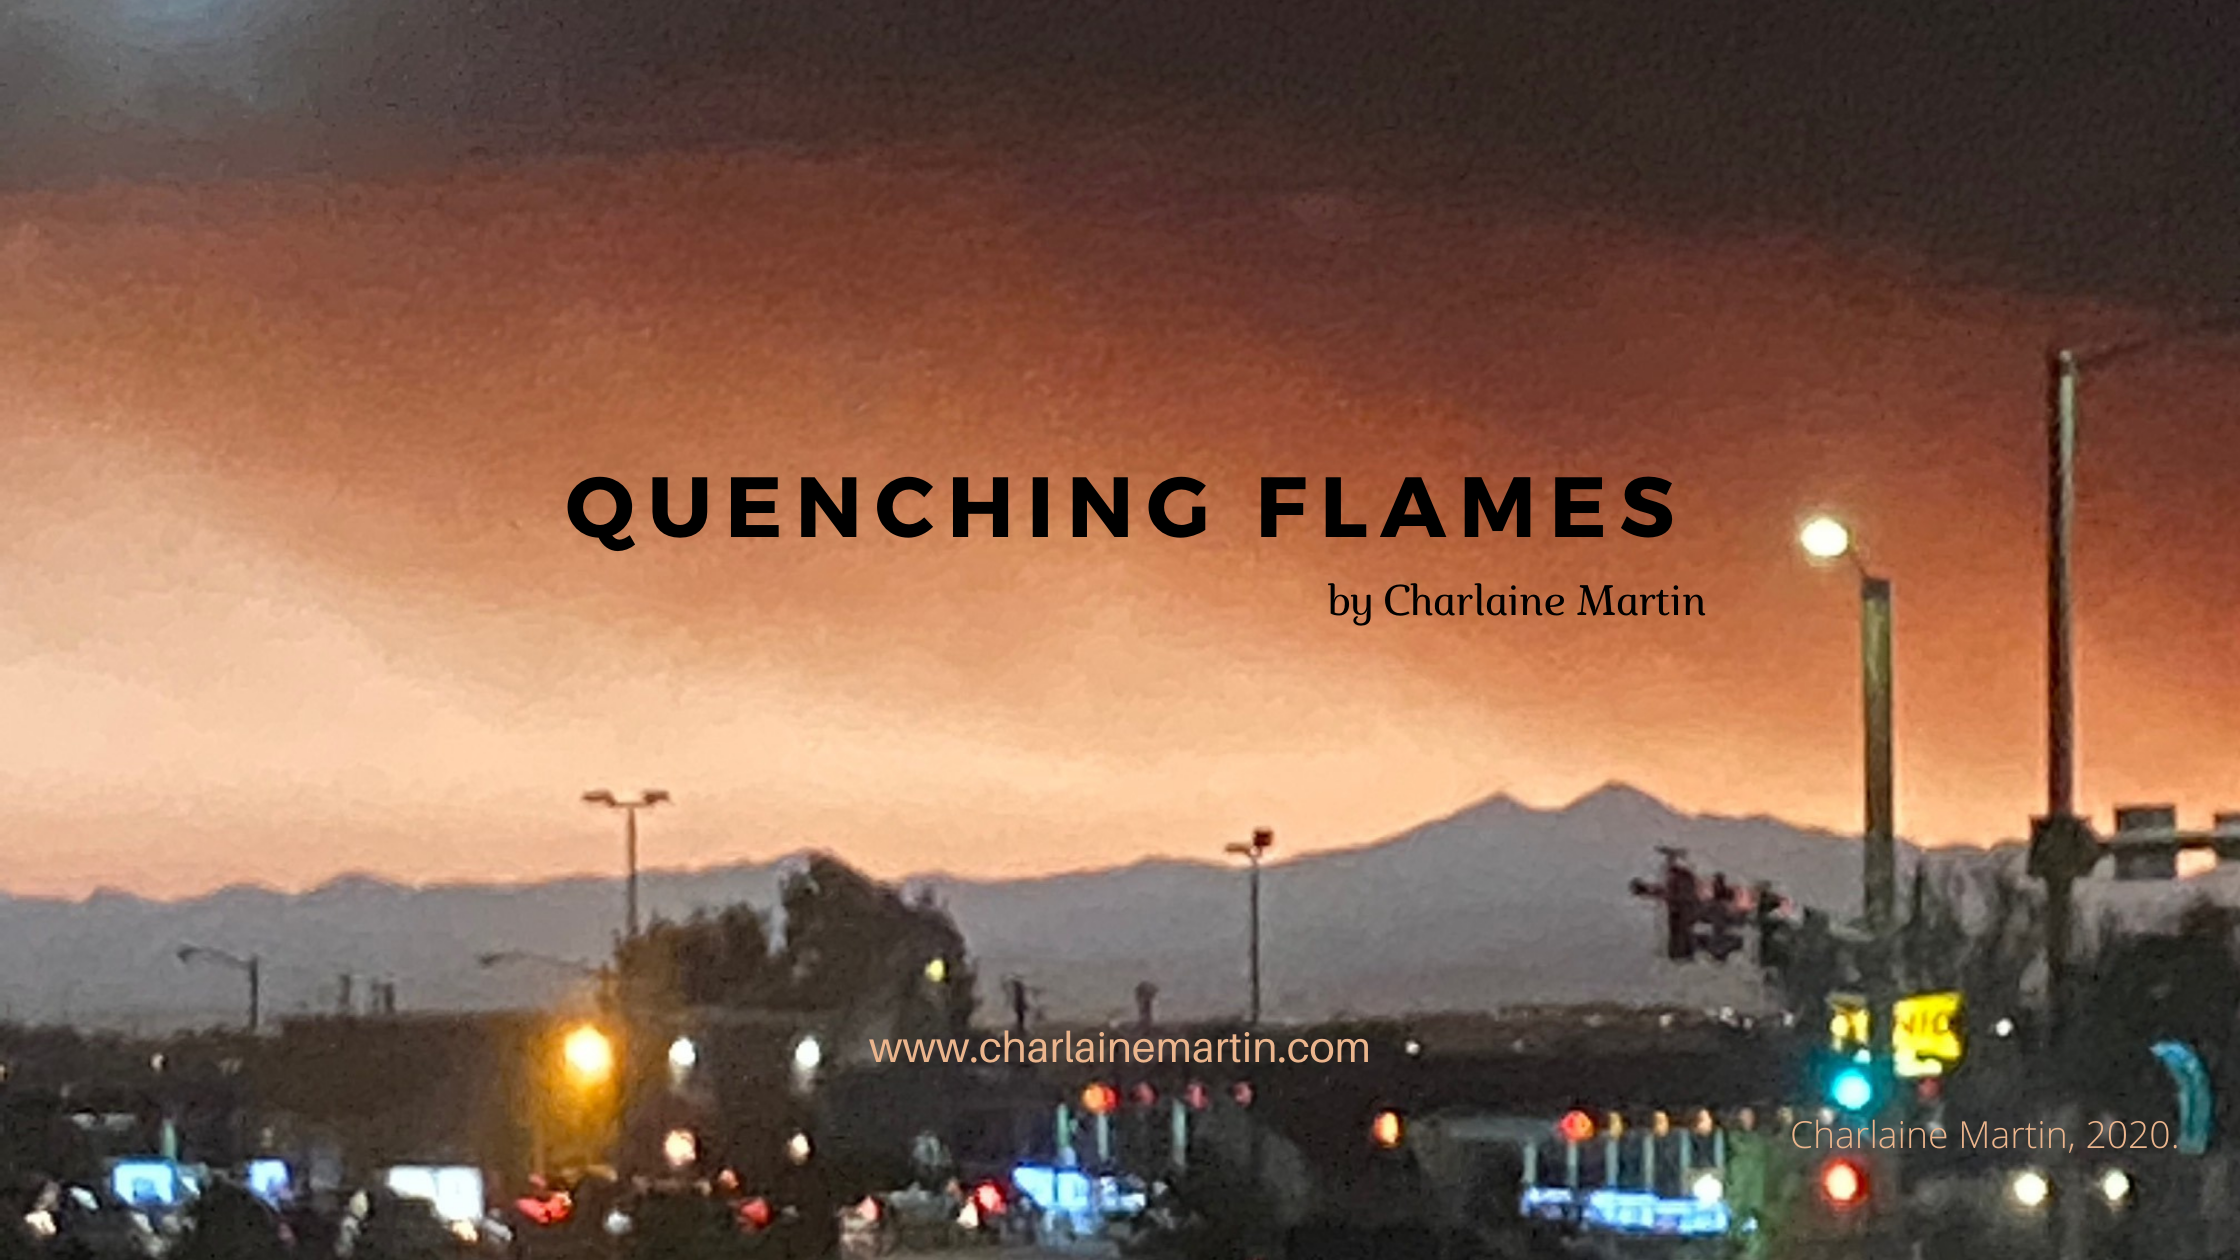 Quenching Flames